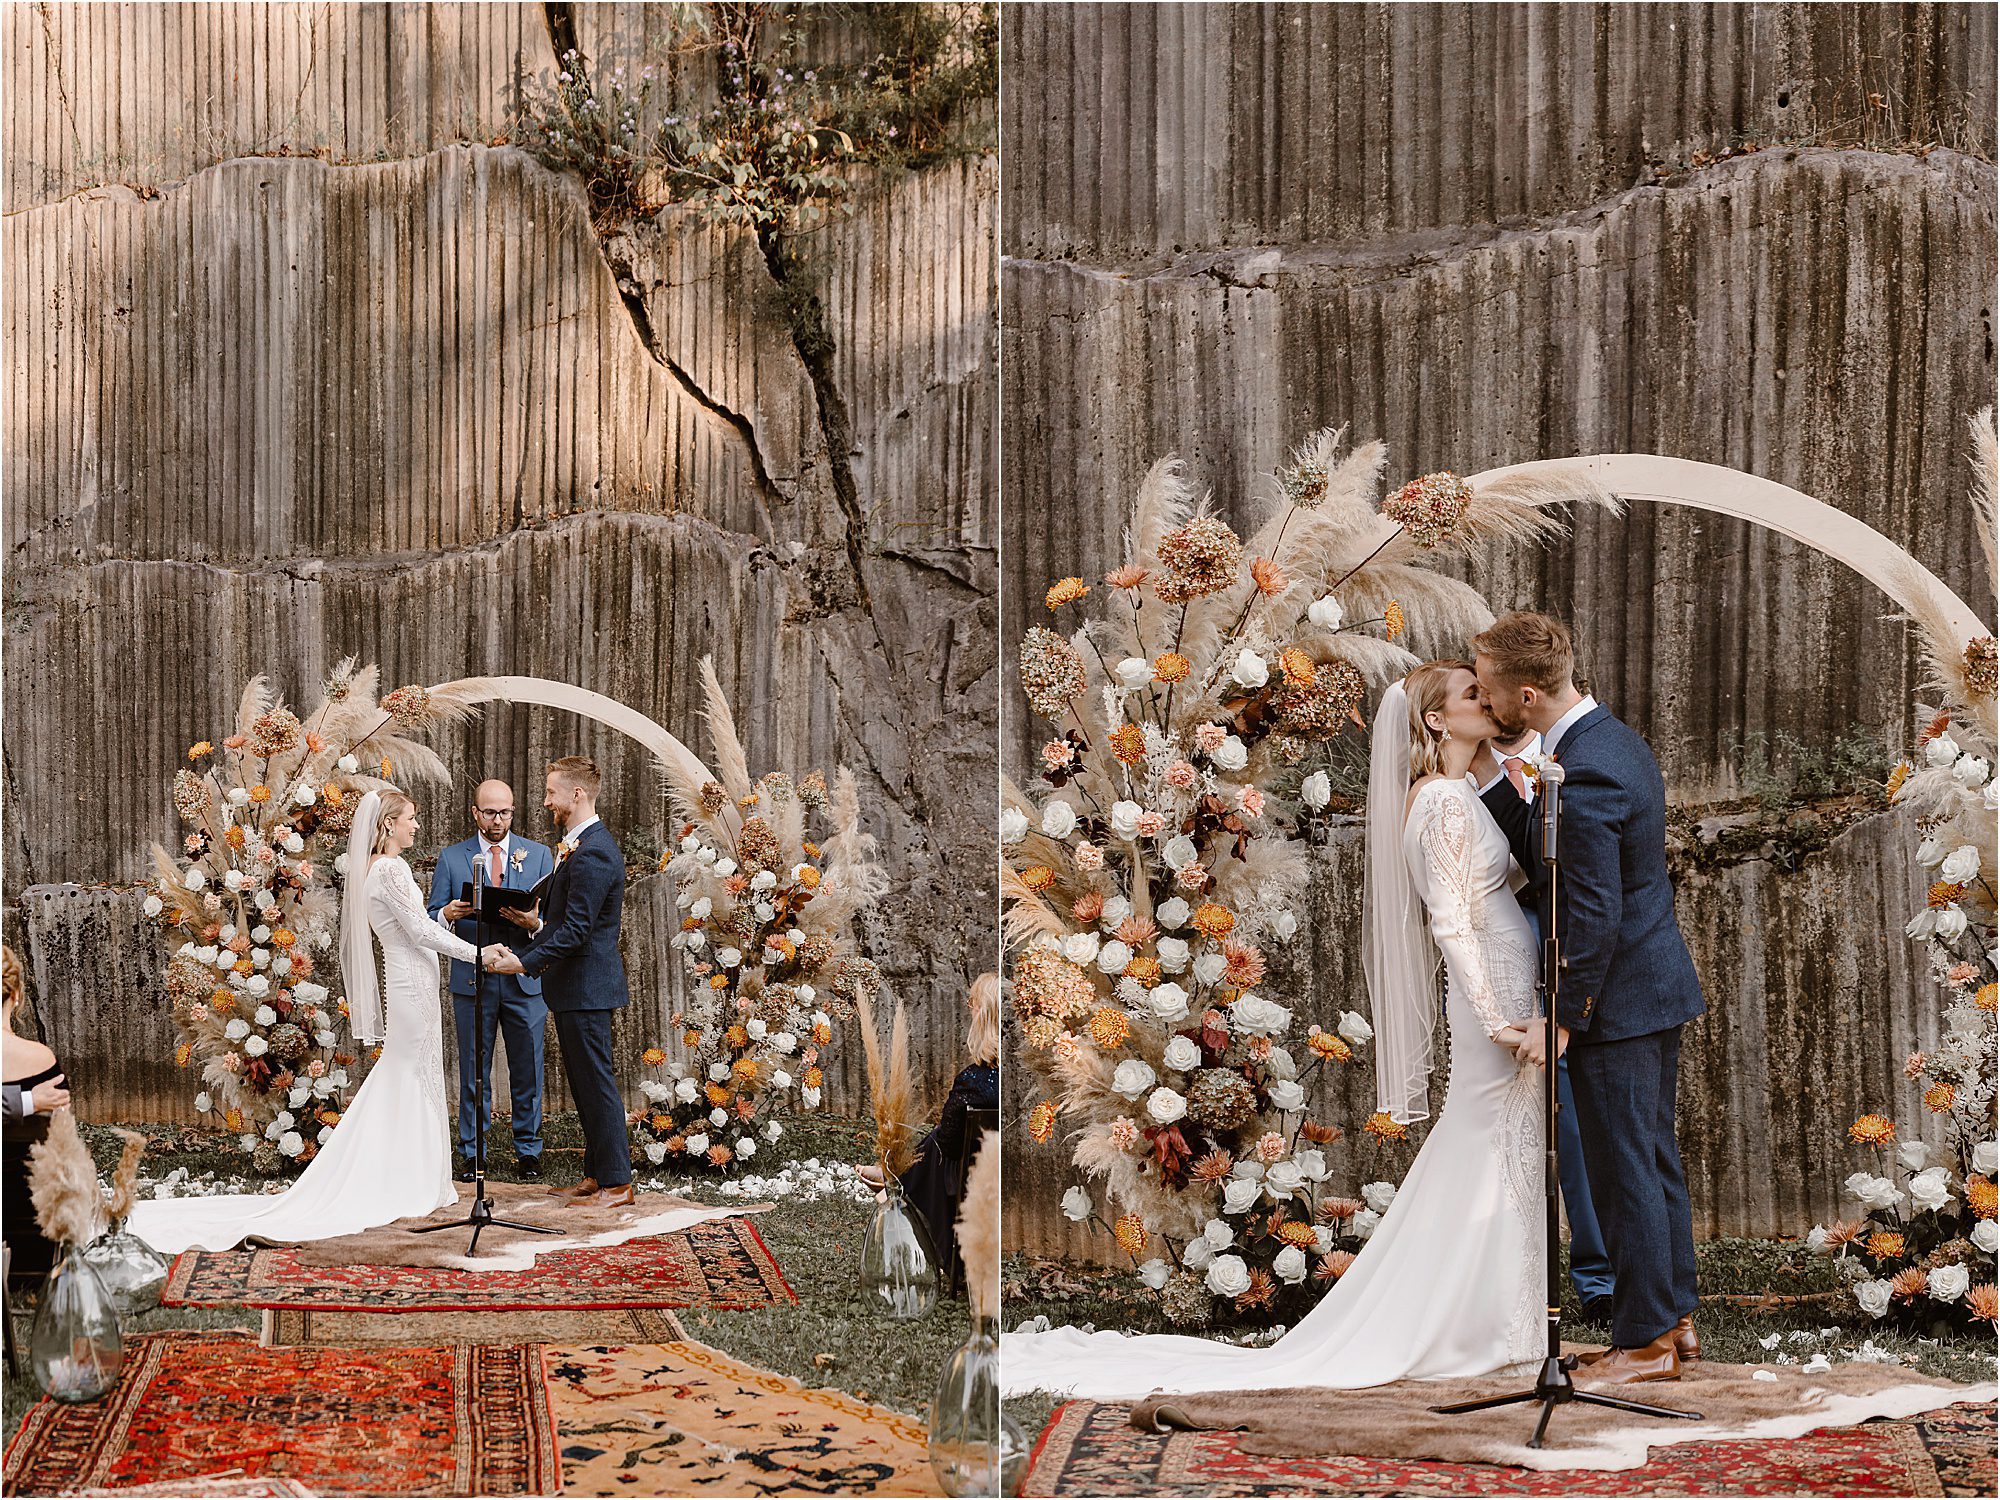 bride and groom kiss in front of circle ceremony arbor surrounded by cream and orange ceremony decor